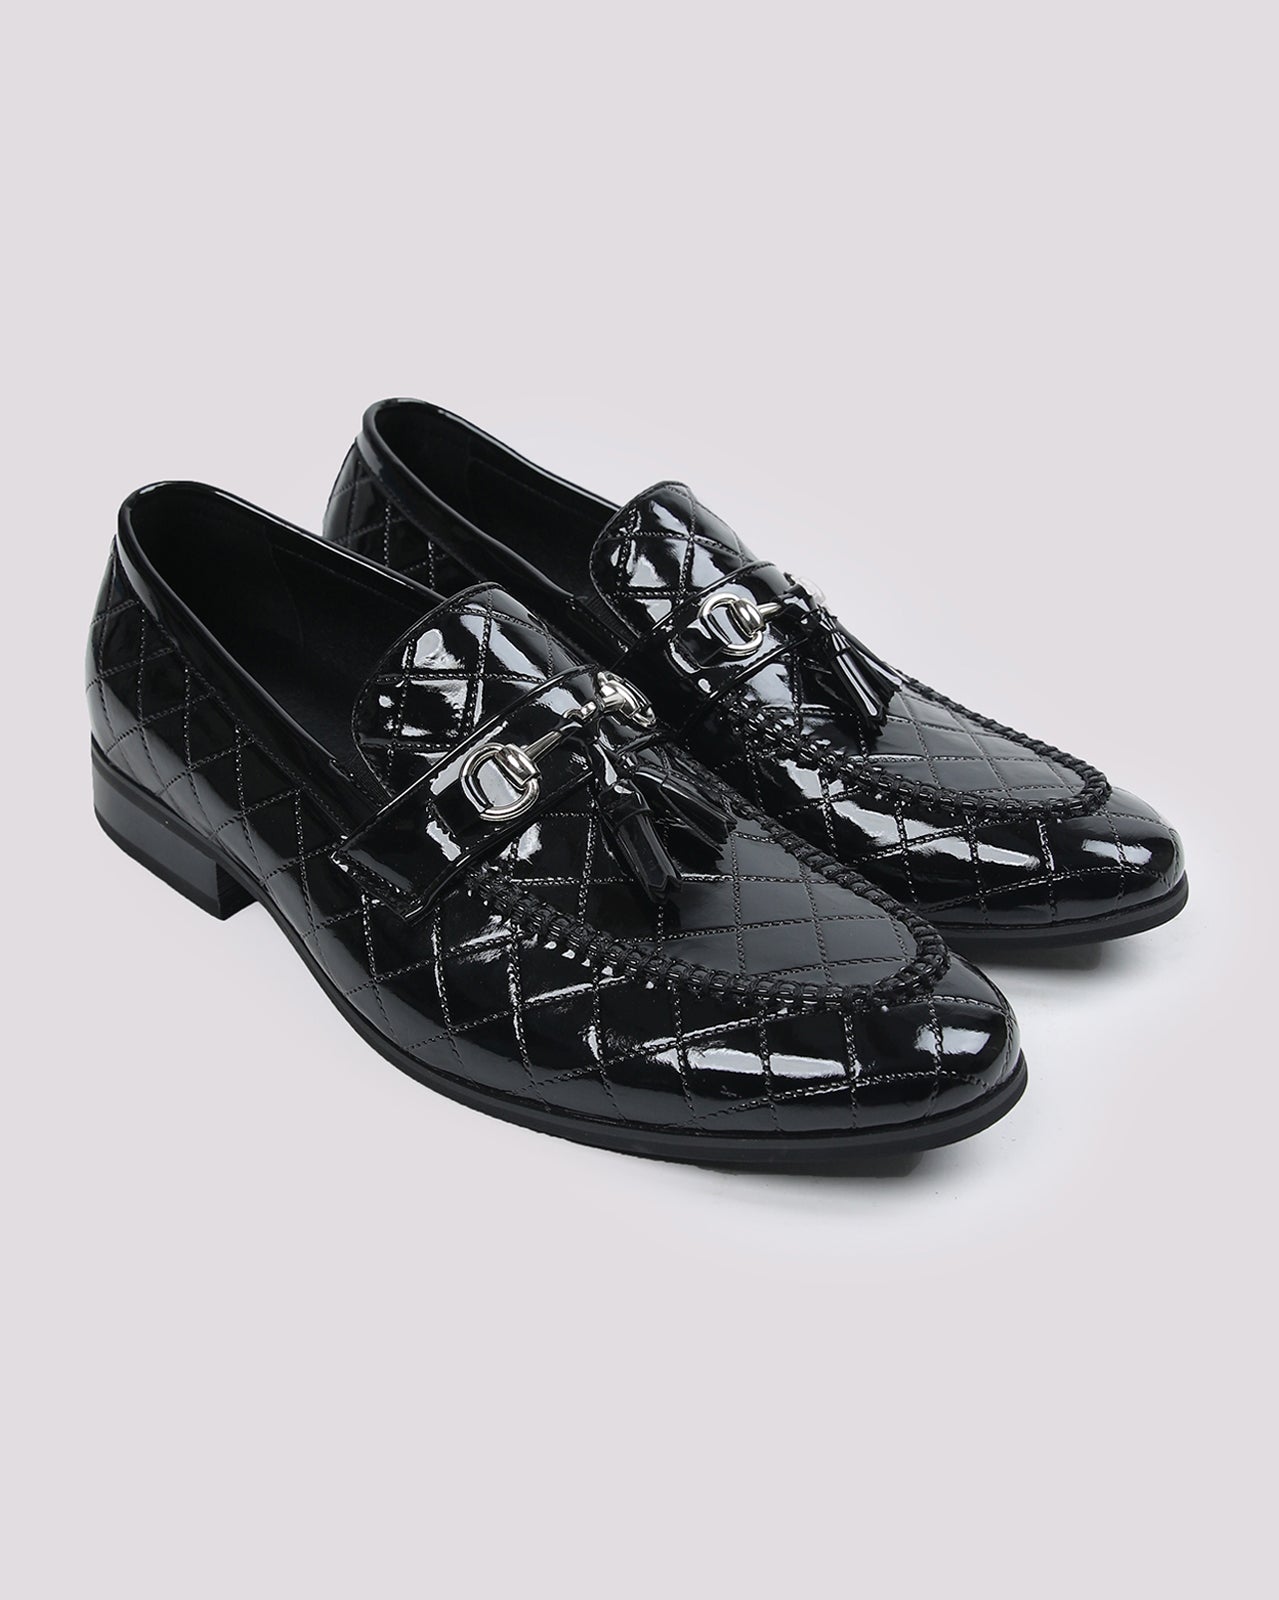 Black Patend Leather Loafer